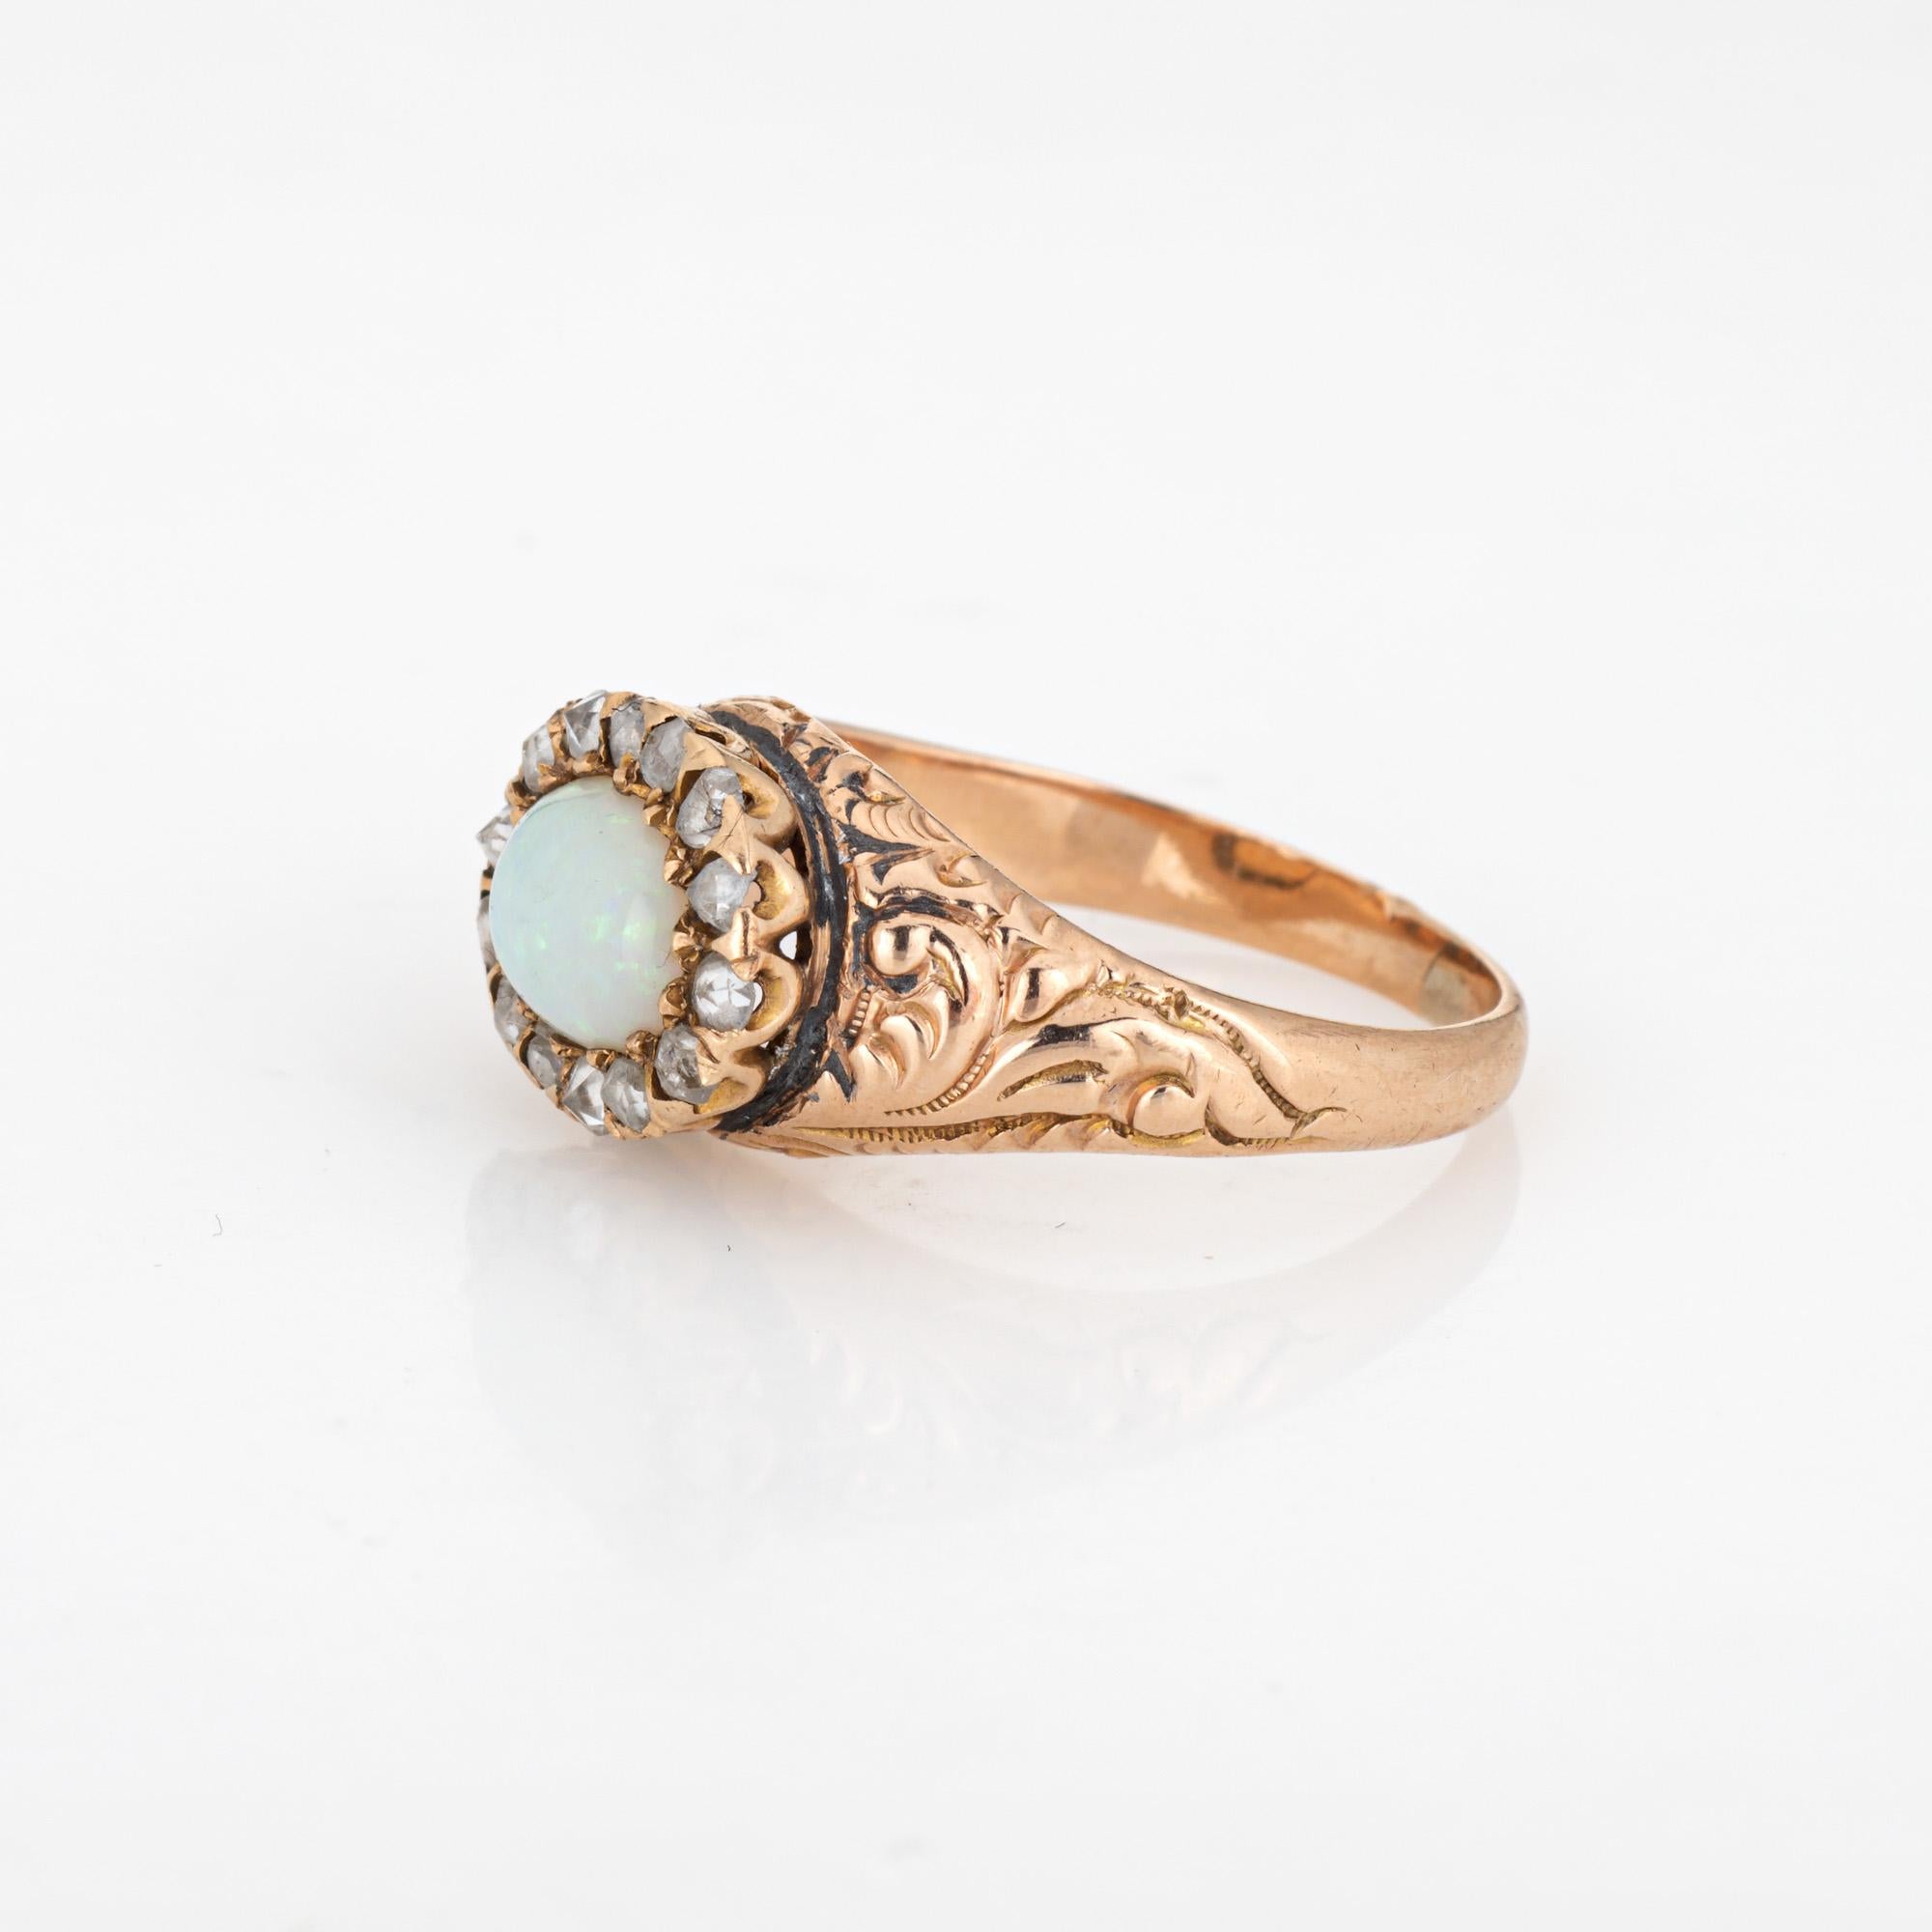 Antique Victorian Opal Diamond Ring 14k Yellow Gold Sz 5.75 Fine Vintage Jewelry In Good Condition For Sale In Torrance, CA